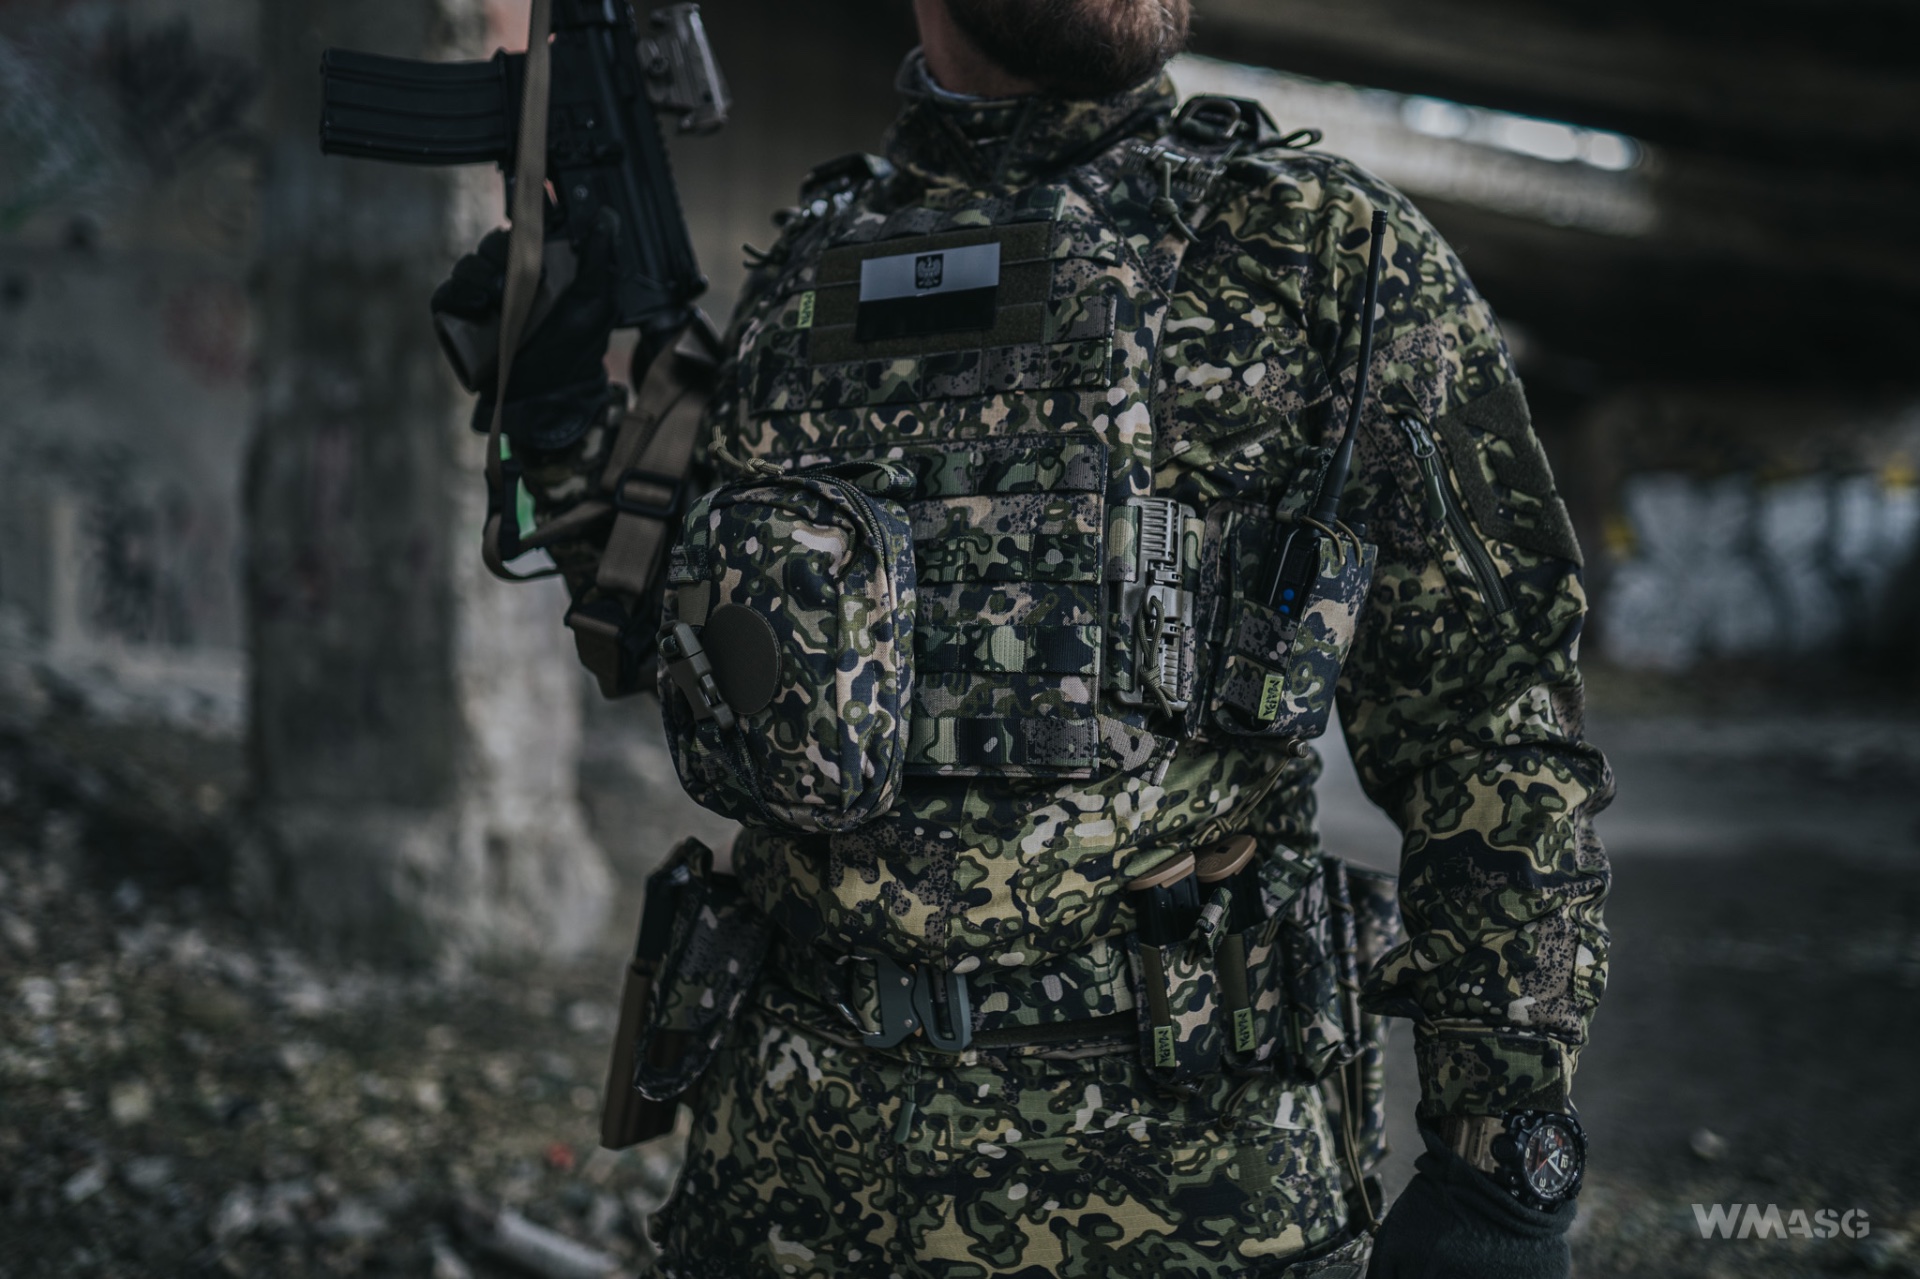 MAPA Tactical TM-01 or a plate carrier in MAPA B camo